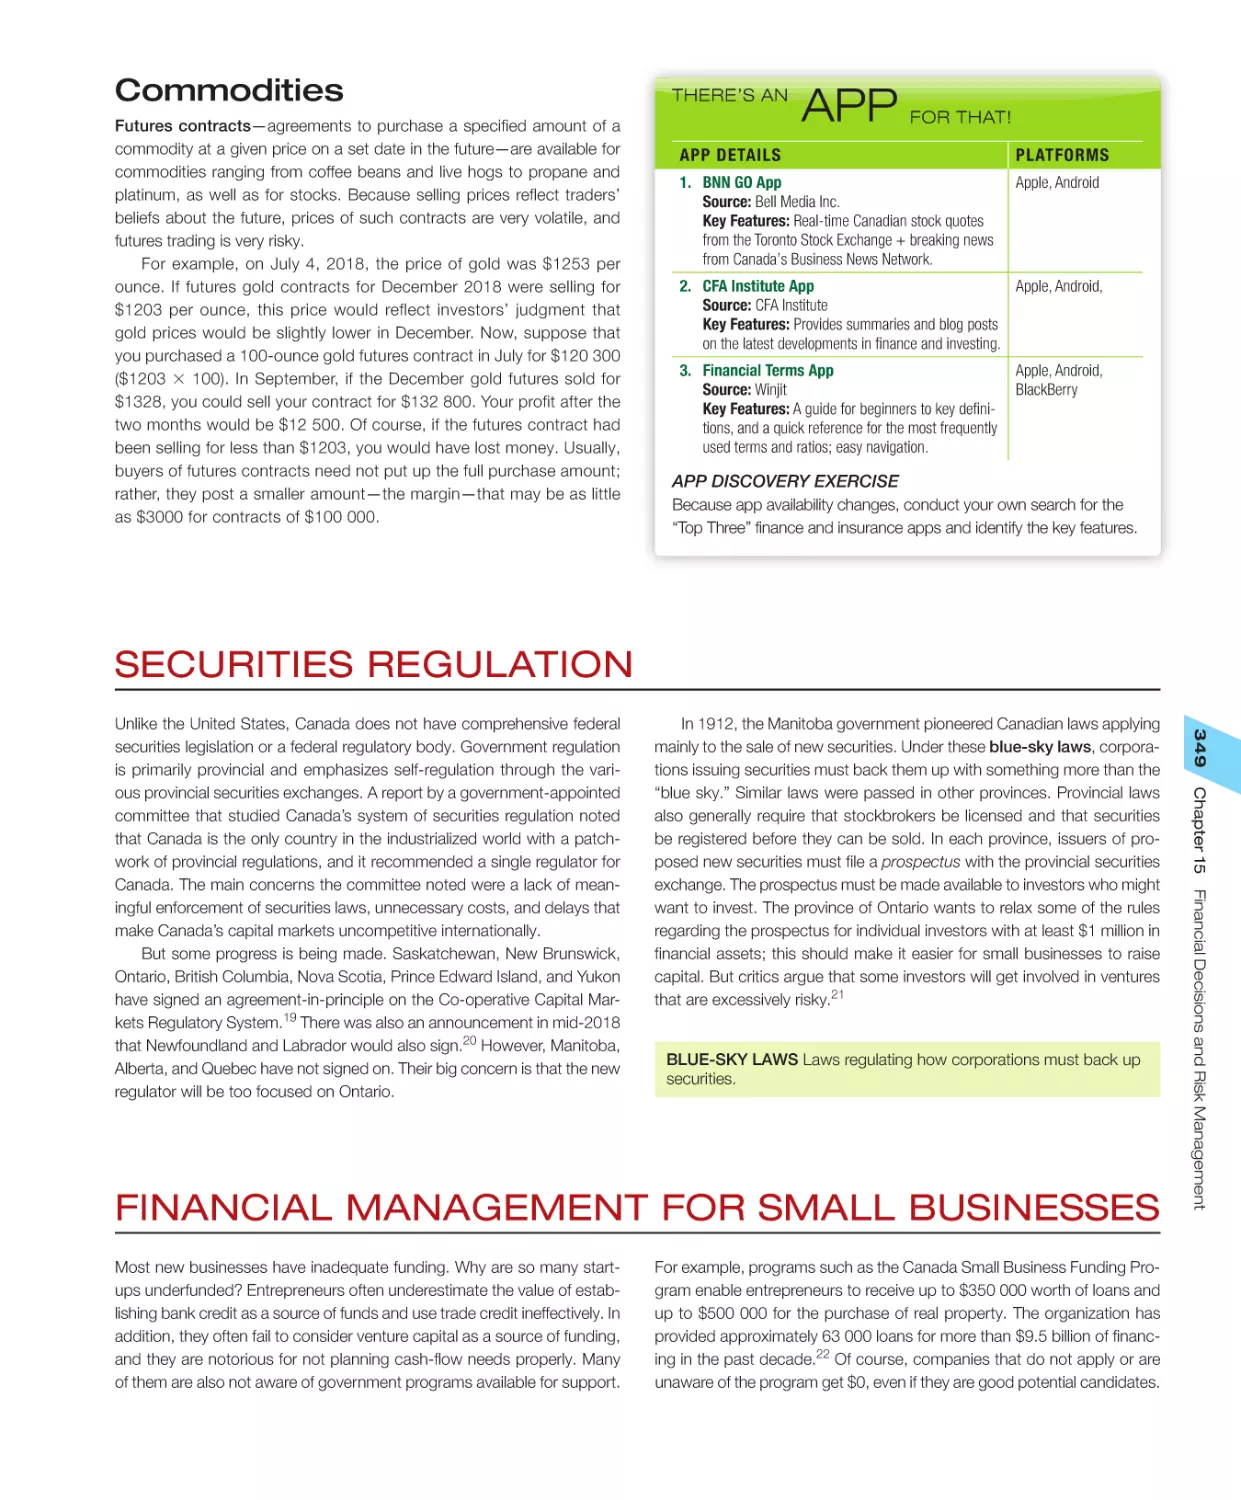 Commodities
Securities Regulation
Financial Management for Small Businesses